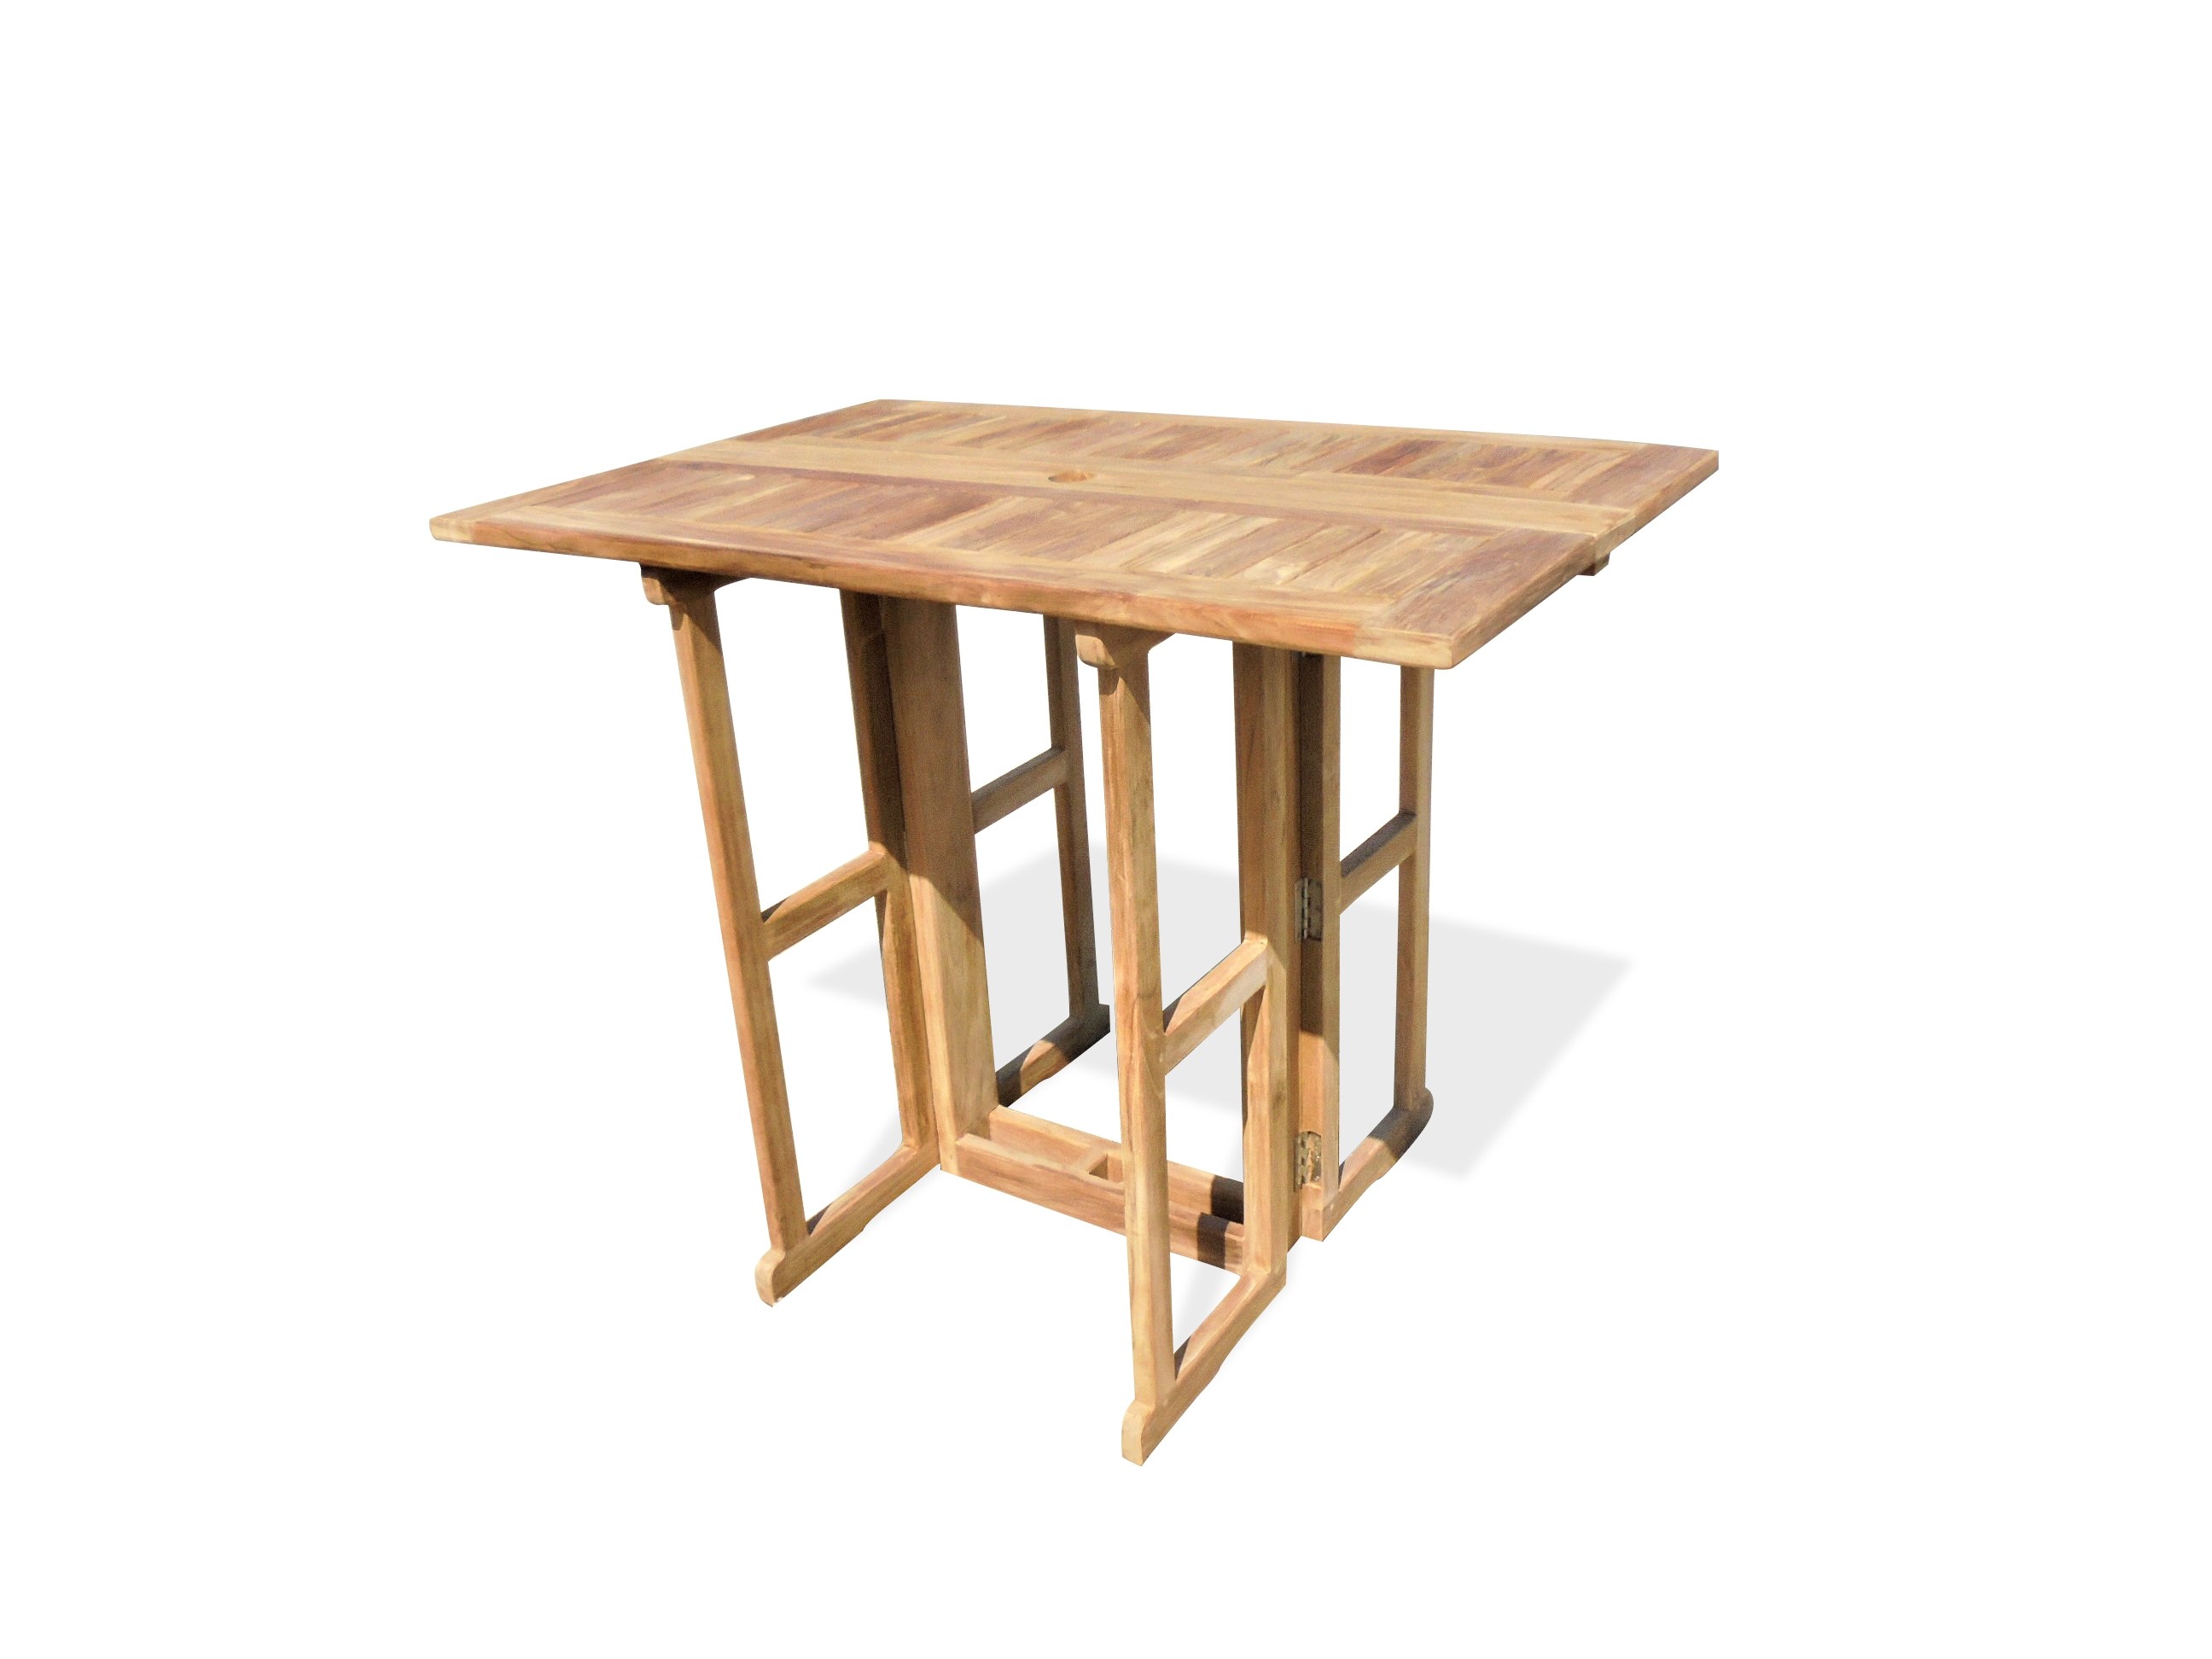 Nassau 48" x 31" Rectangular Teak Drop Leaf Folding Bar Table...use with 1 Leaf Up or 2.... Makes 2 different tables (Counter Height is 5" Lower then Bar)